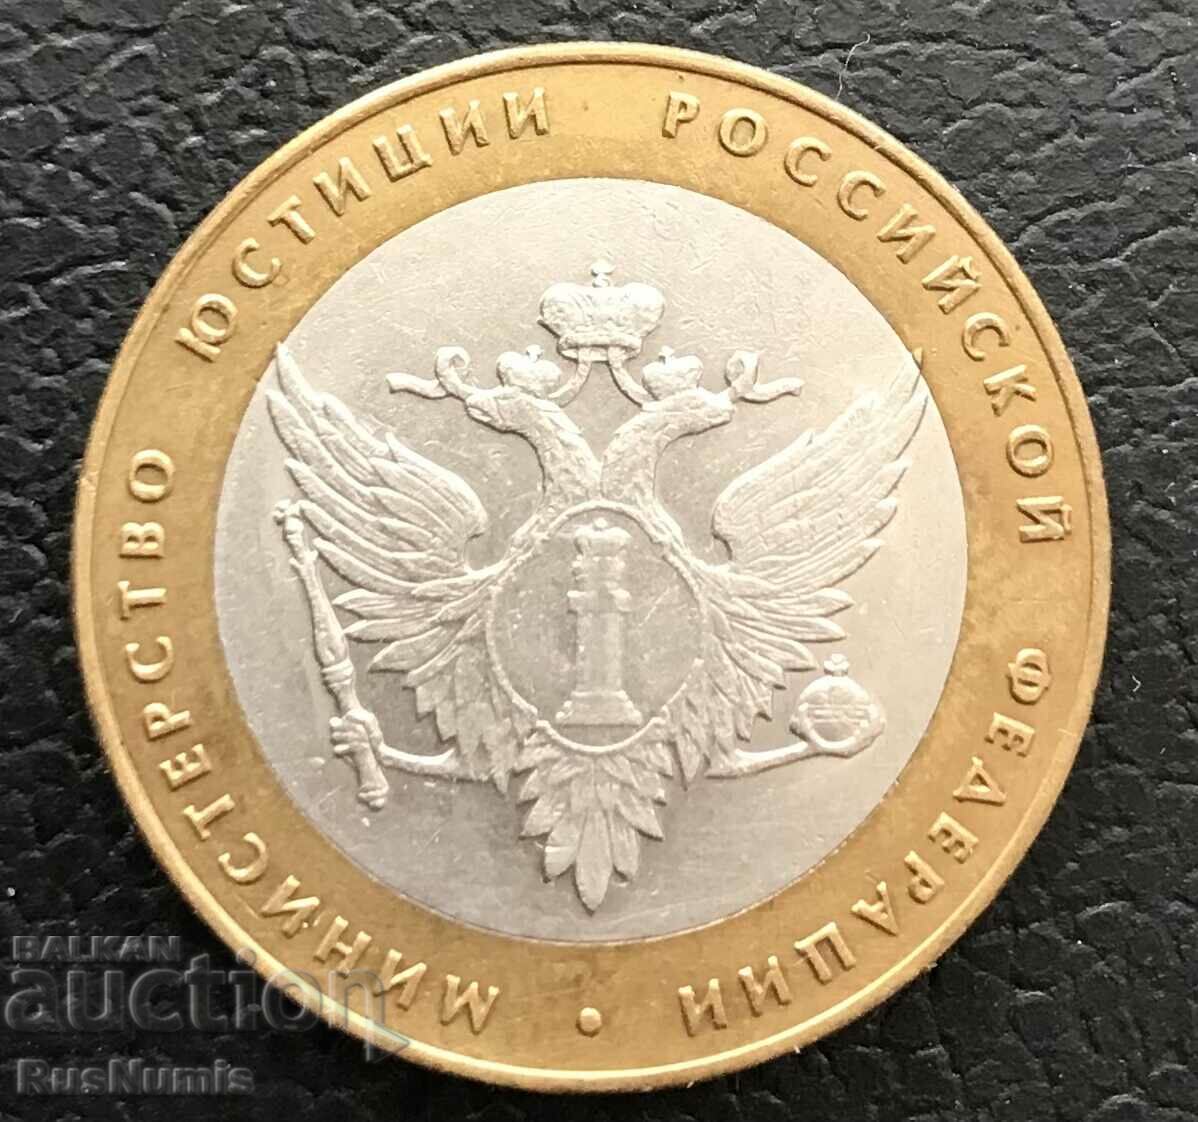 Russia. 10 rubles 2002. Ministry of Justice.